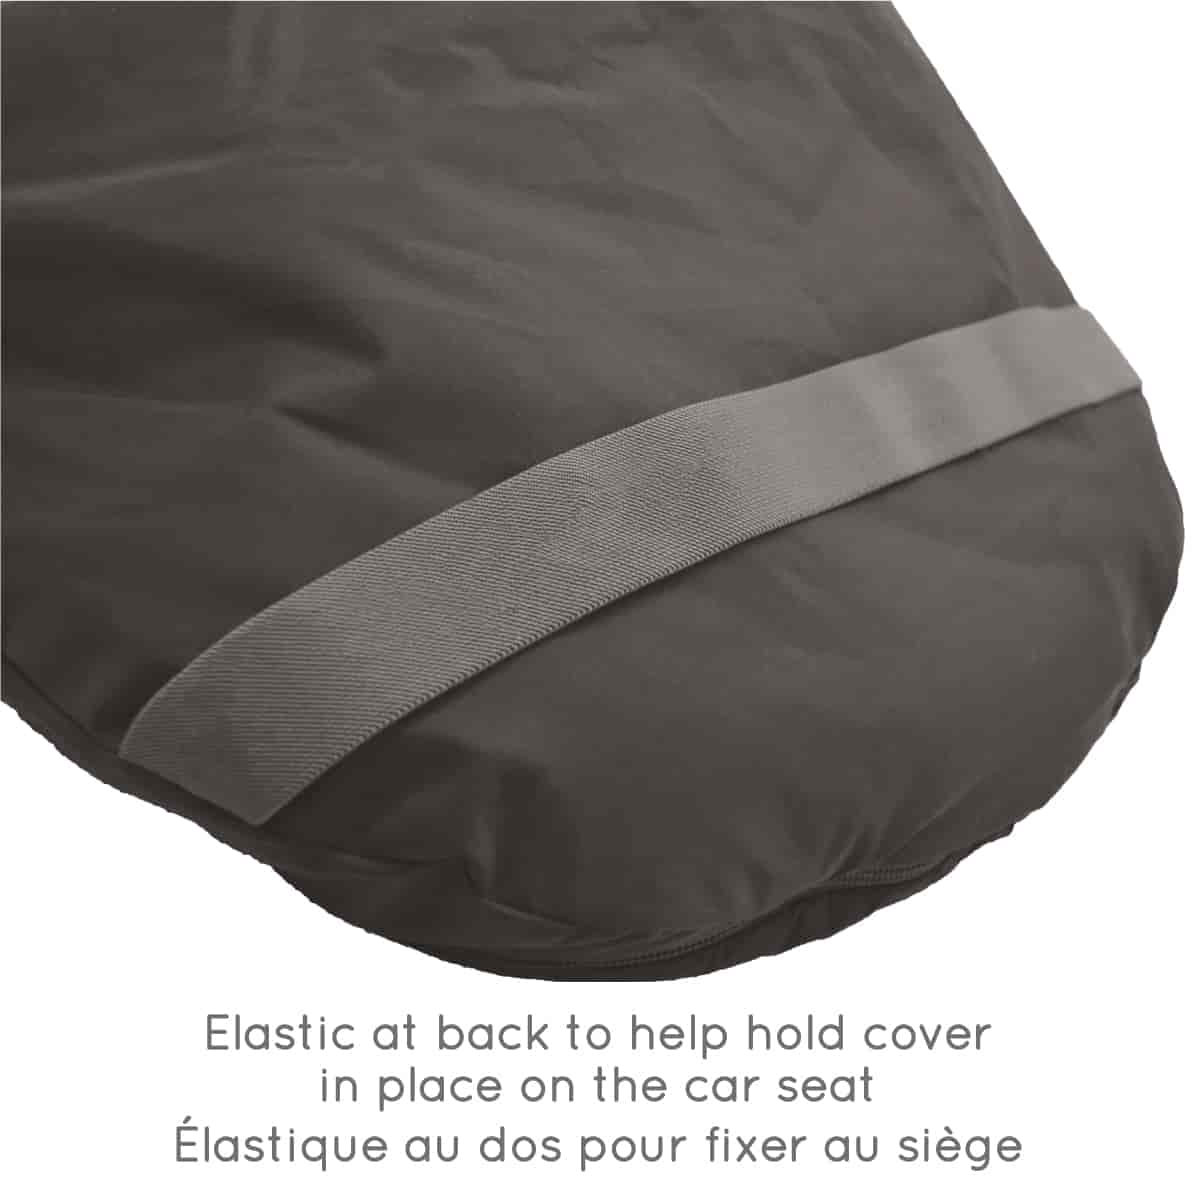 Baby car seat cover for winter - Boreal